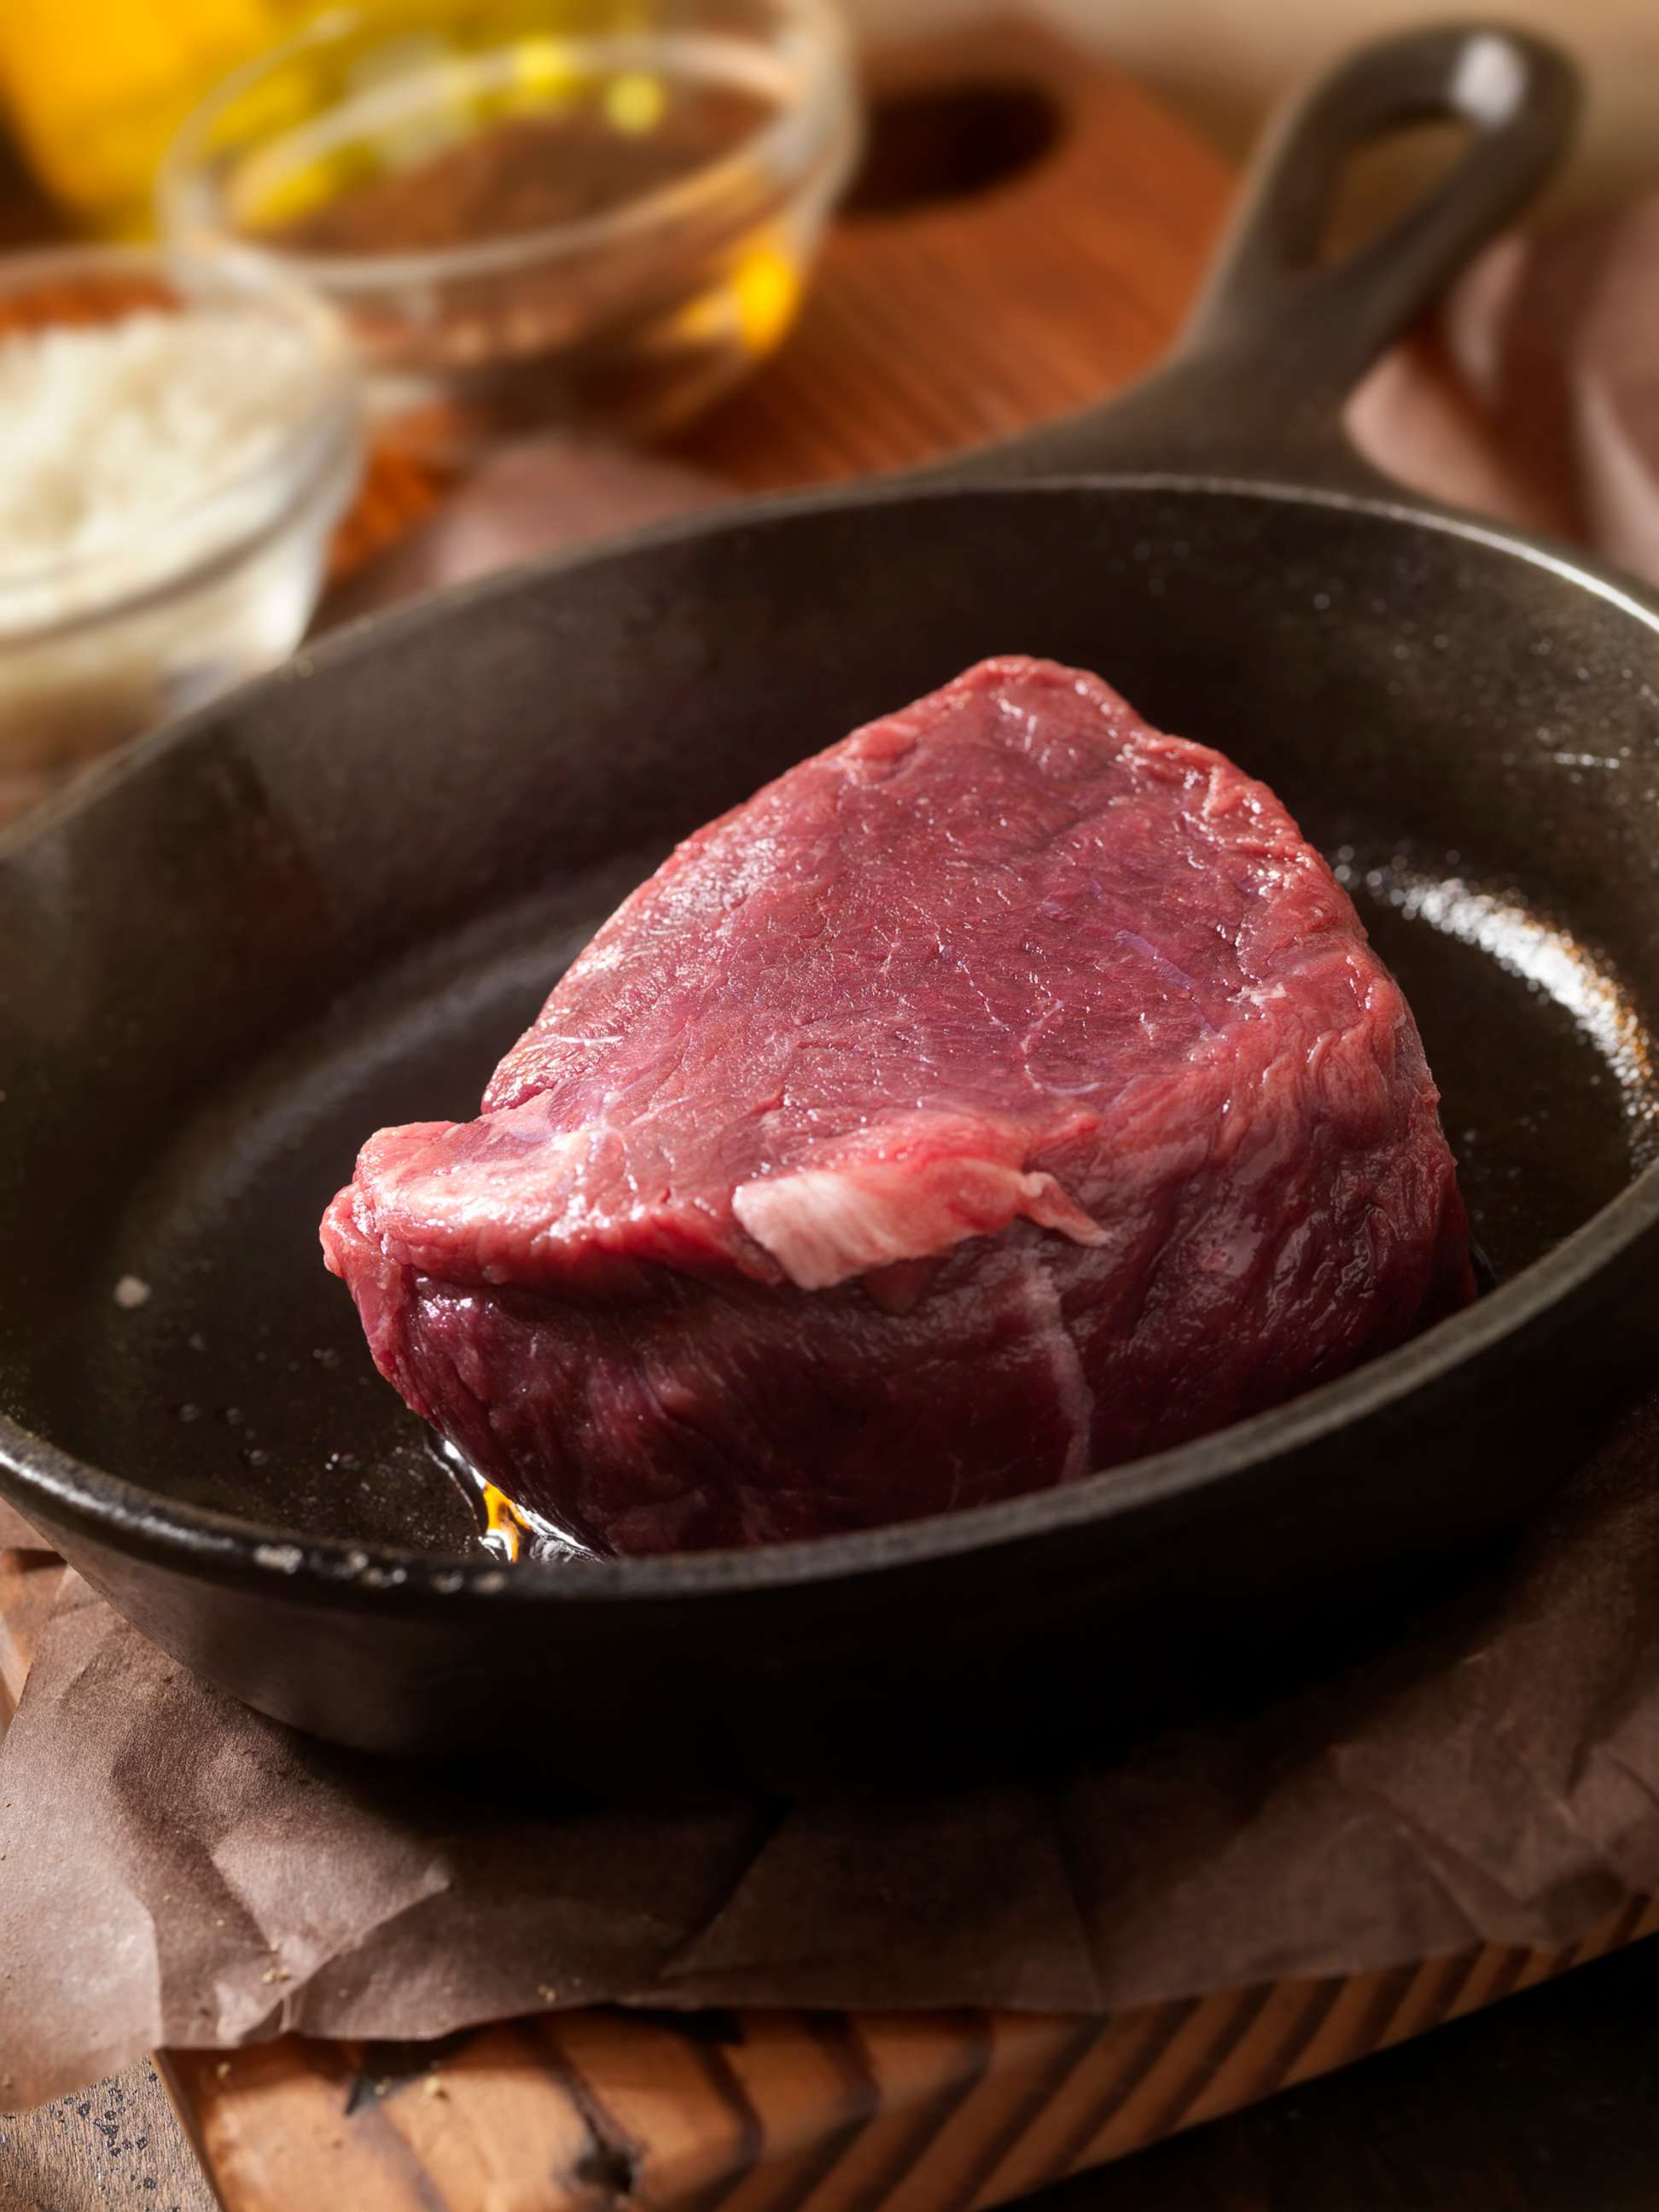 PHOTO: Steak fillet is prepared to be cooked in a cast iron skillet.